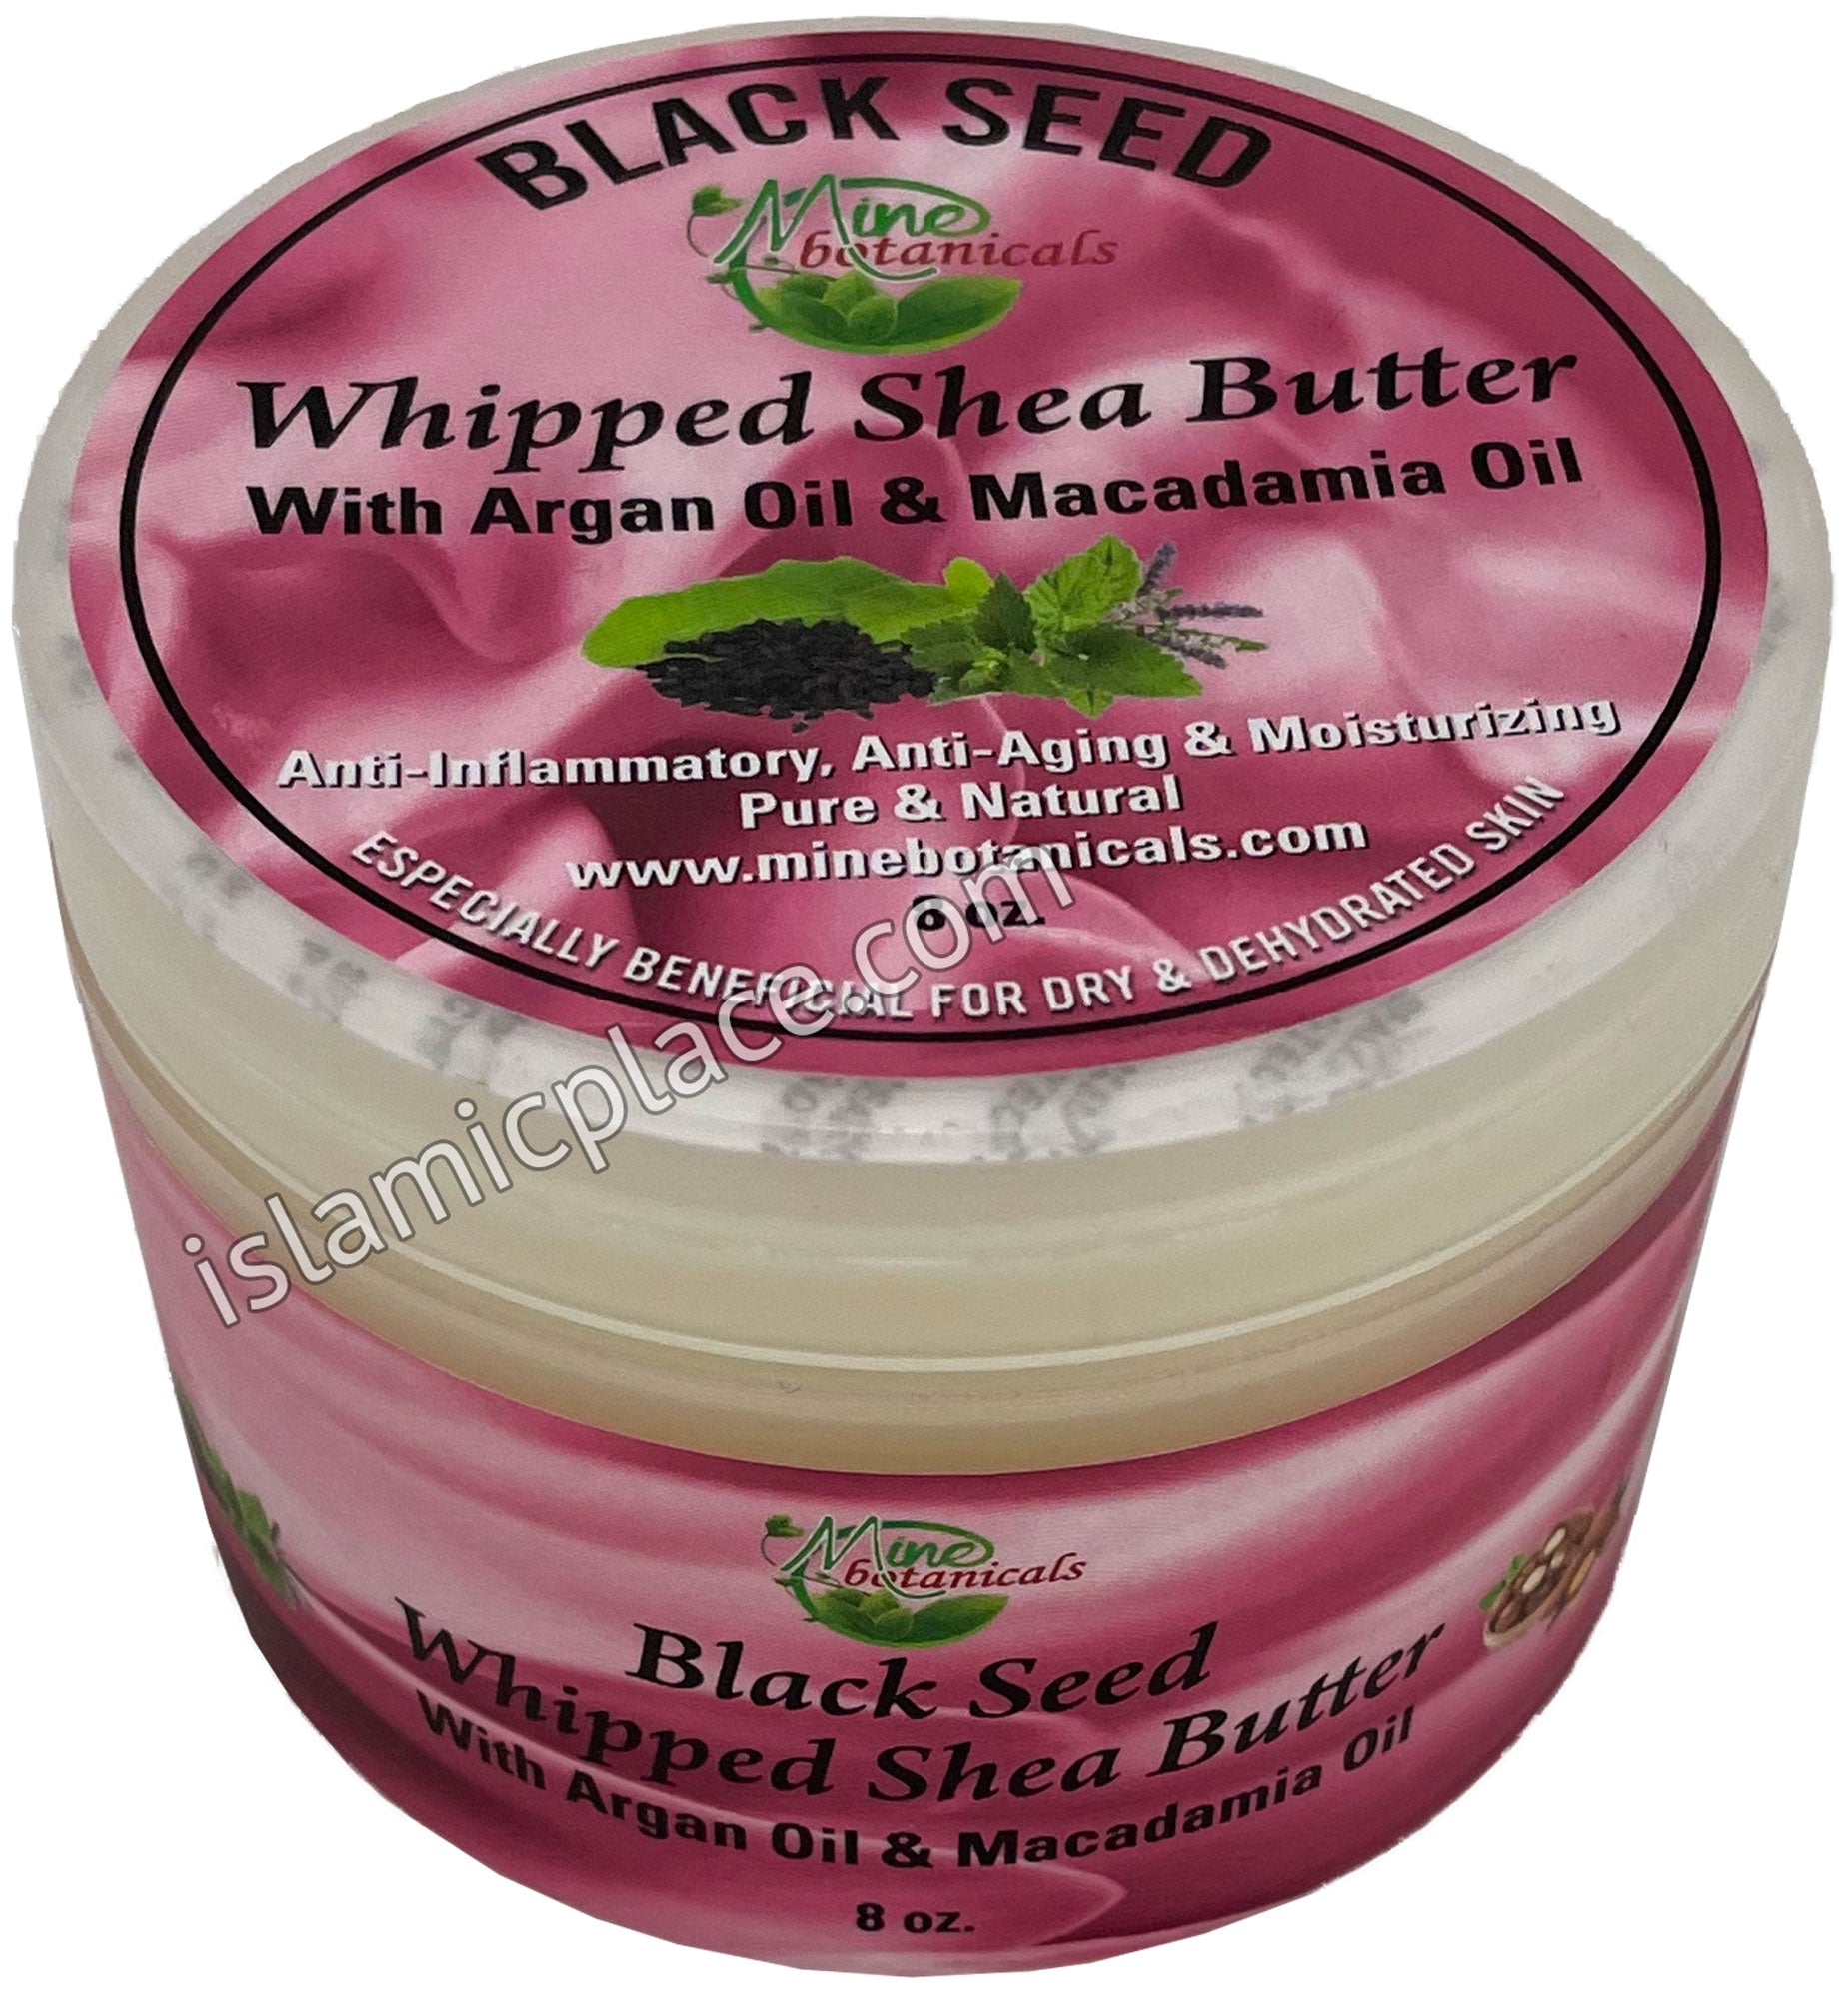 Black Seed Whipped Shea Butter With Argan & Macadamia Oil